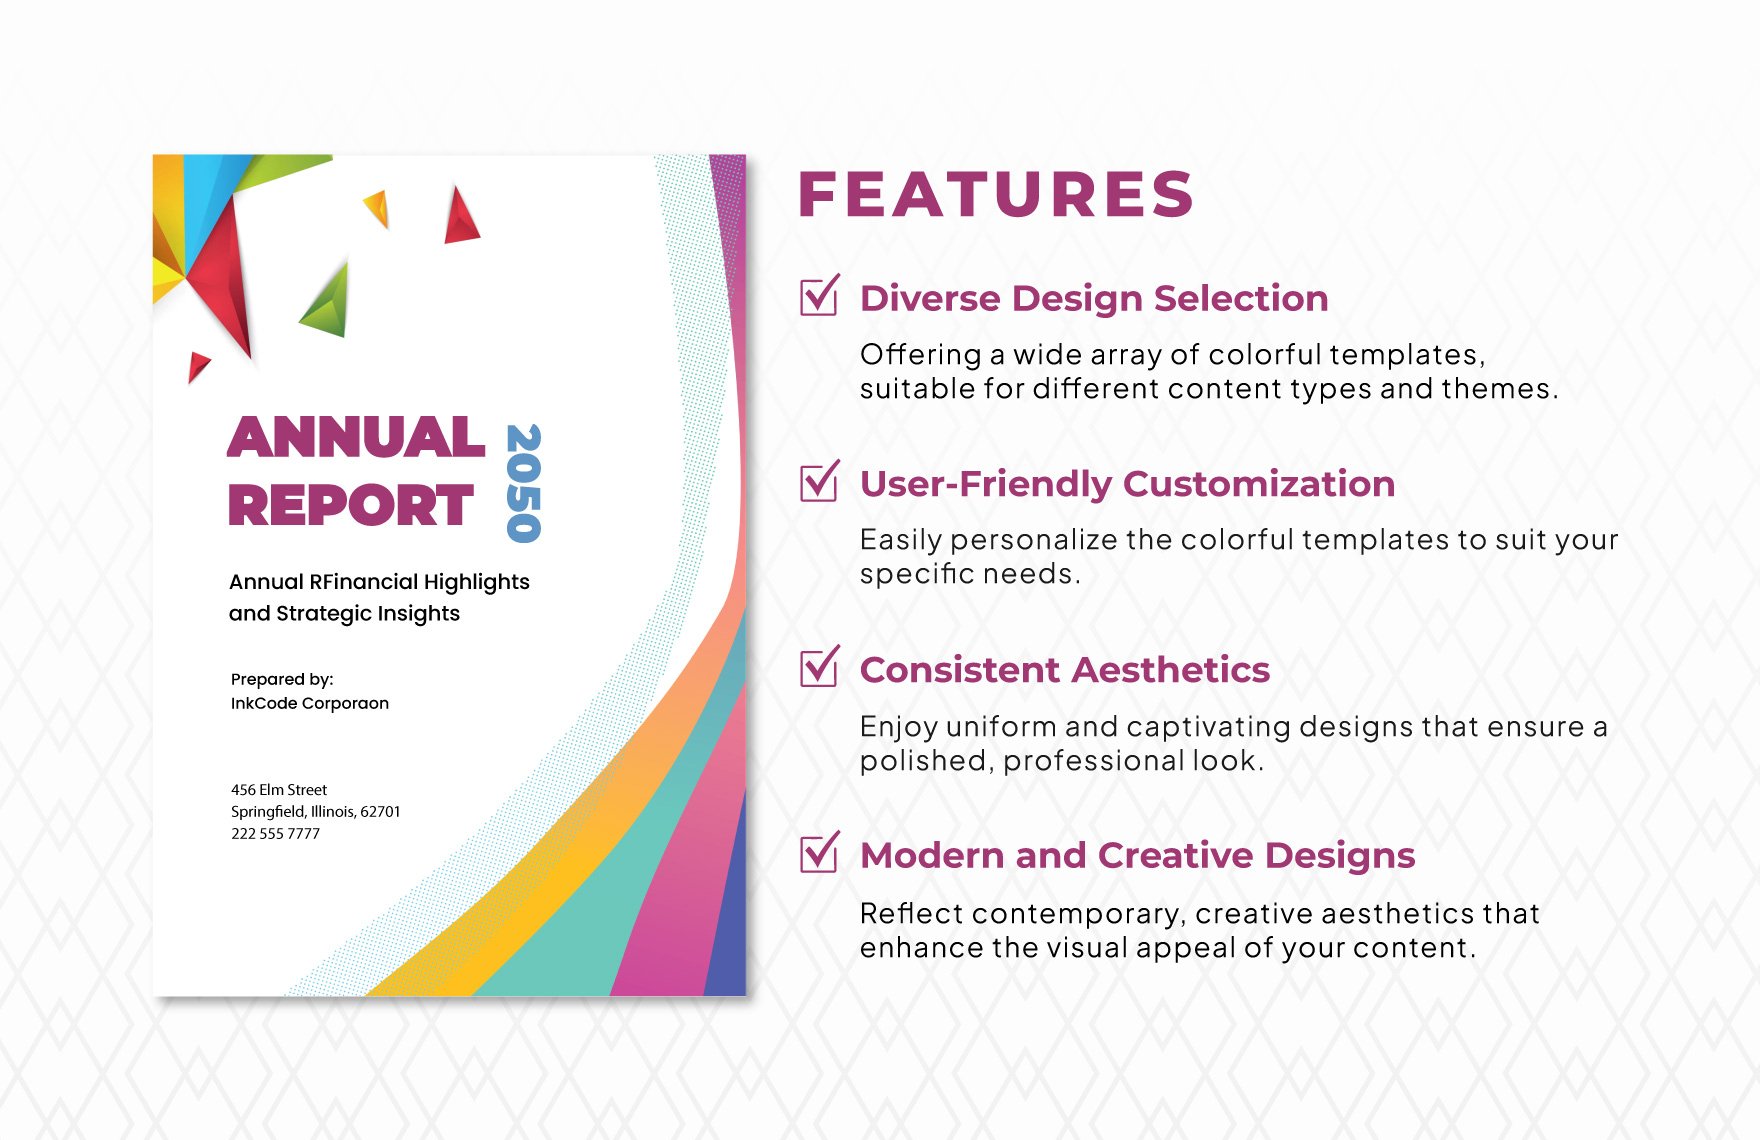 Colorful Cover Page Template